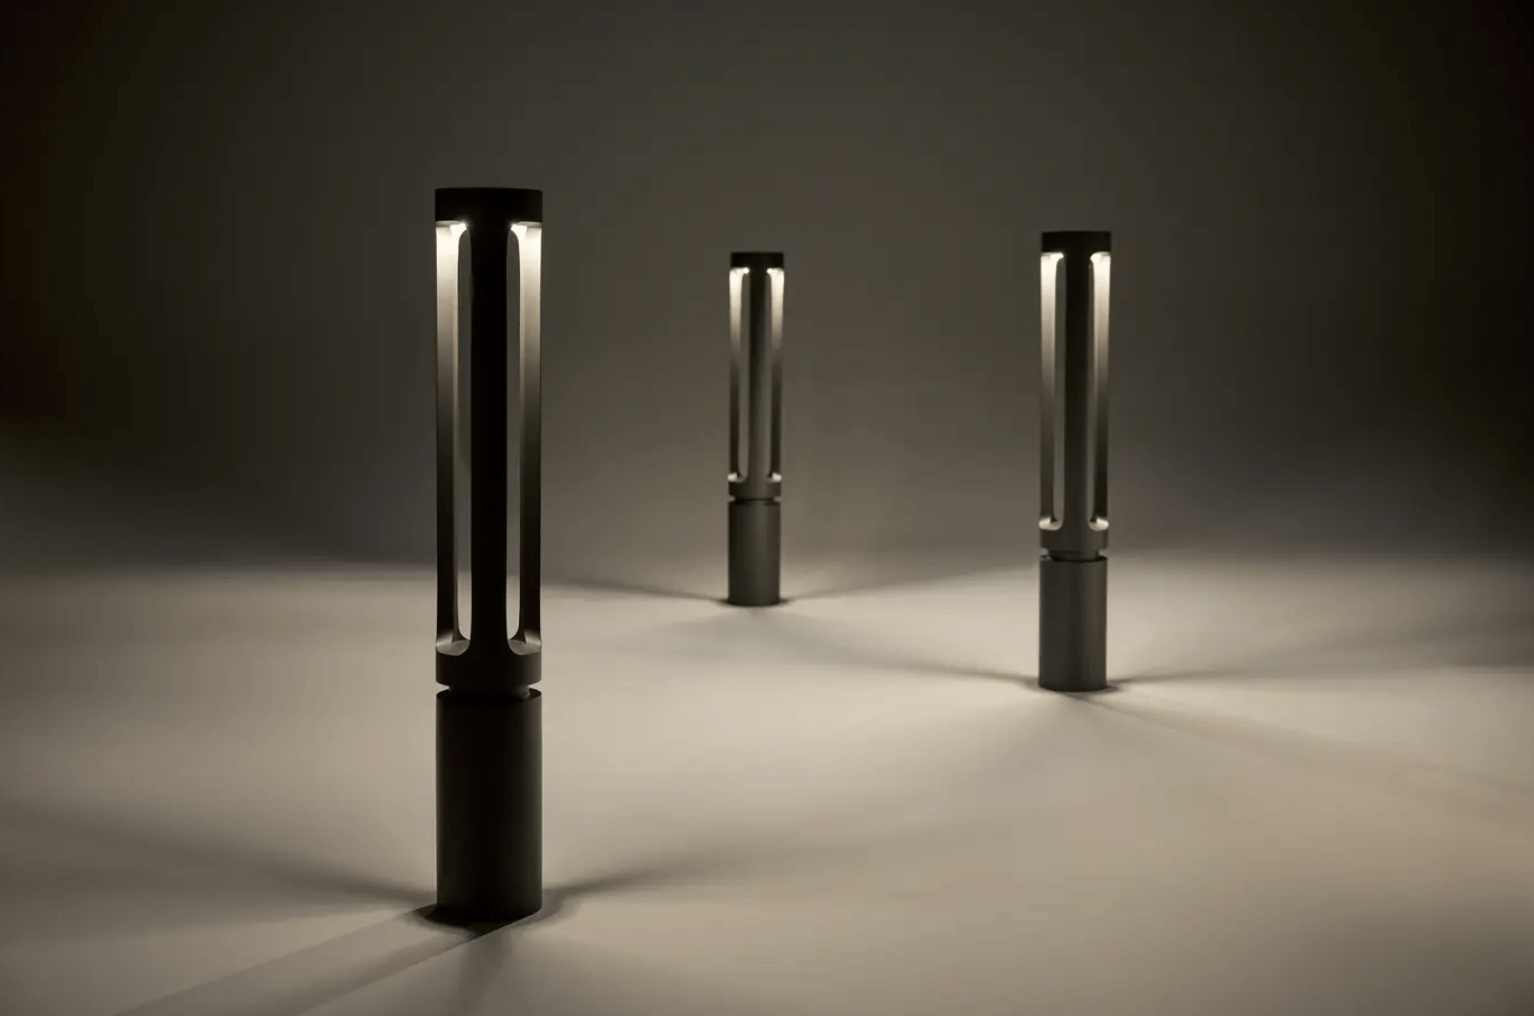 Landscape Forms Releases Outline Family of Urban Lighting Elements